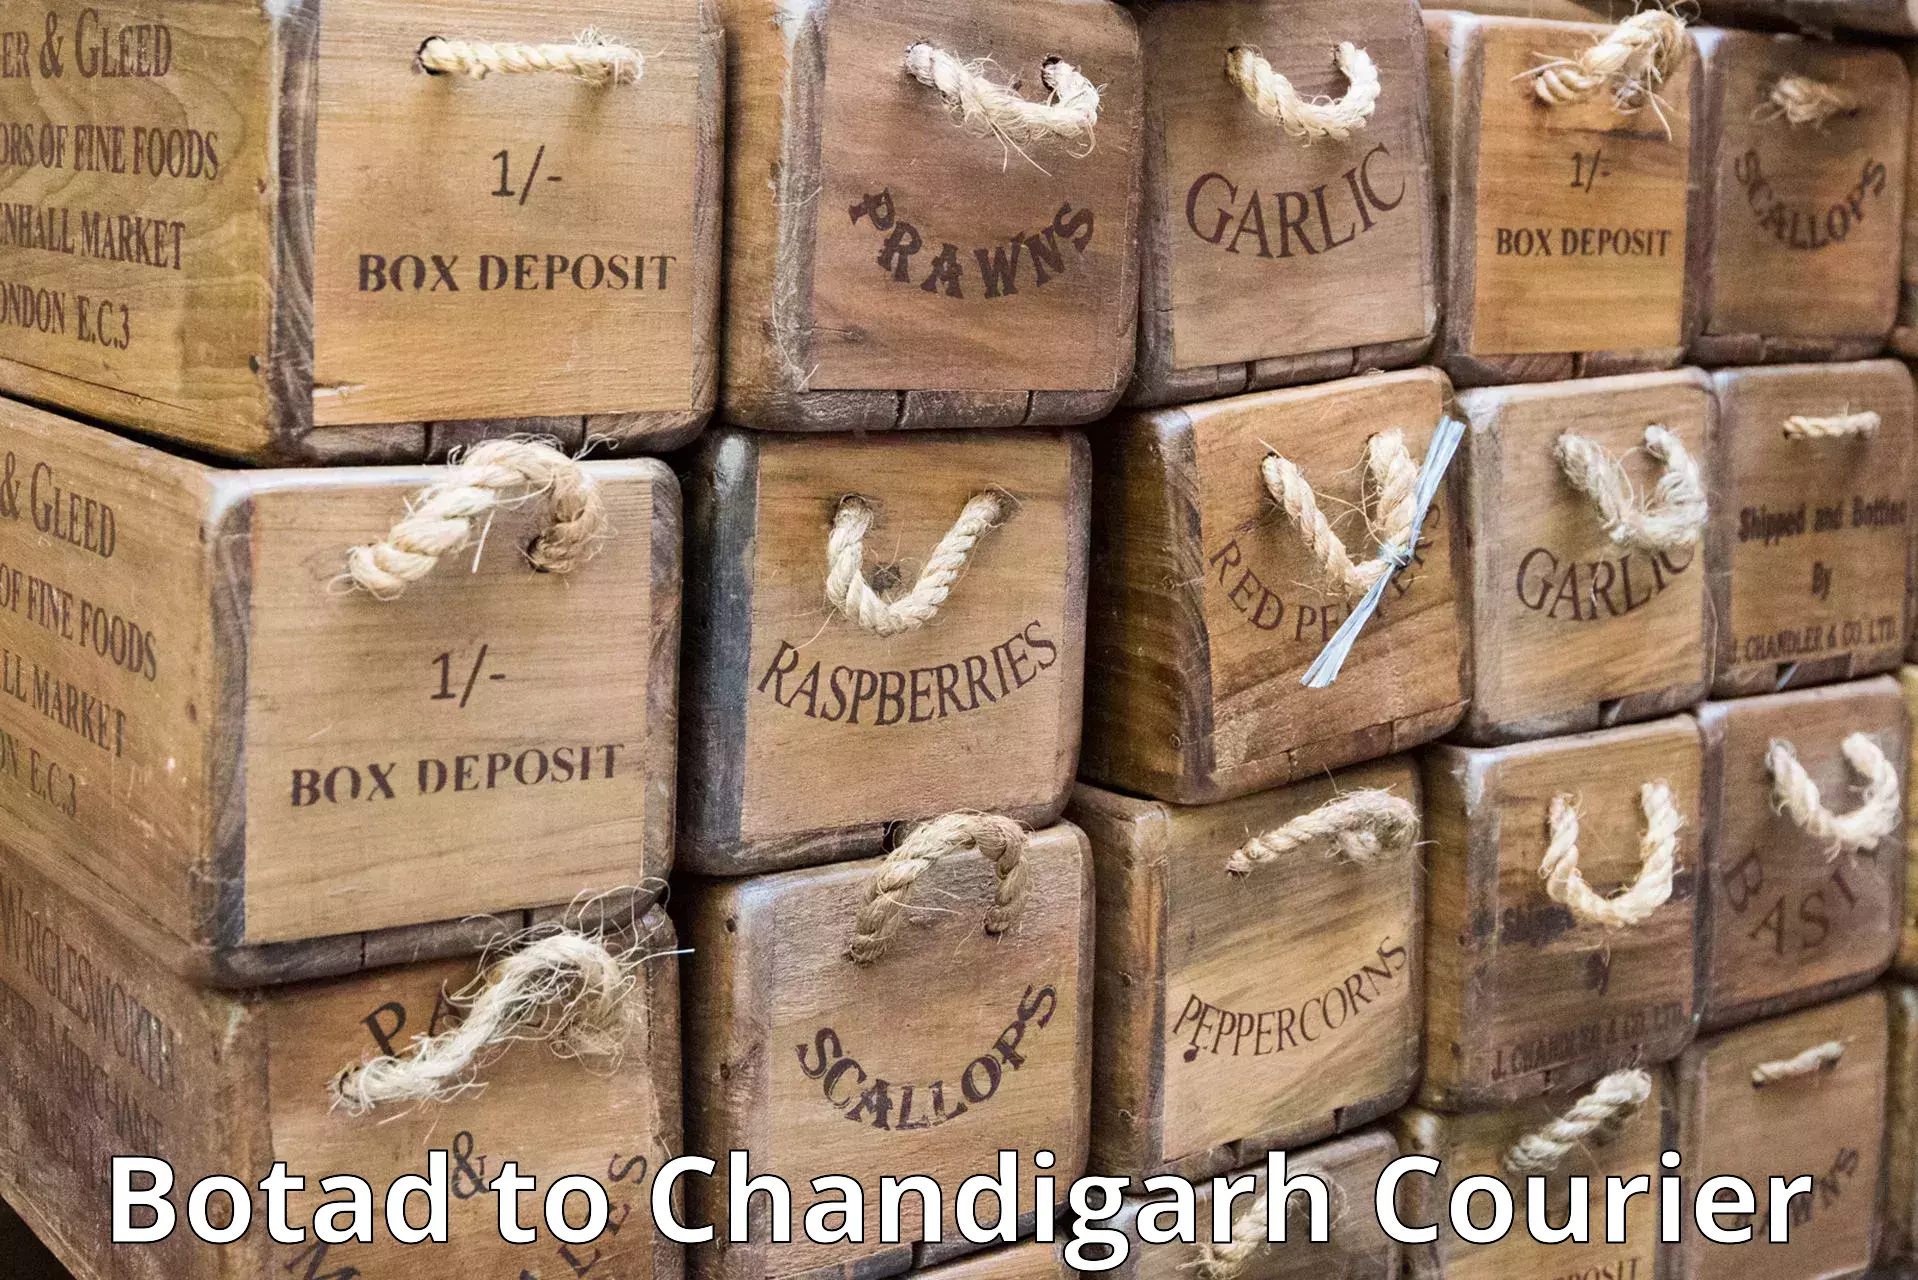 Efficient shipping operations Botad to Chandigarh